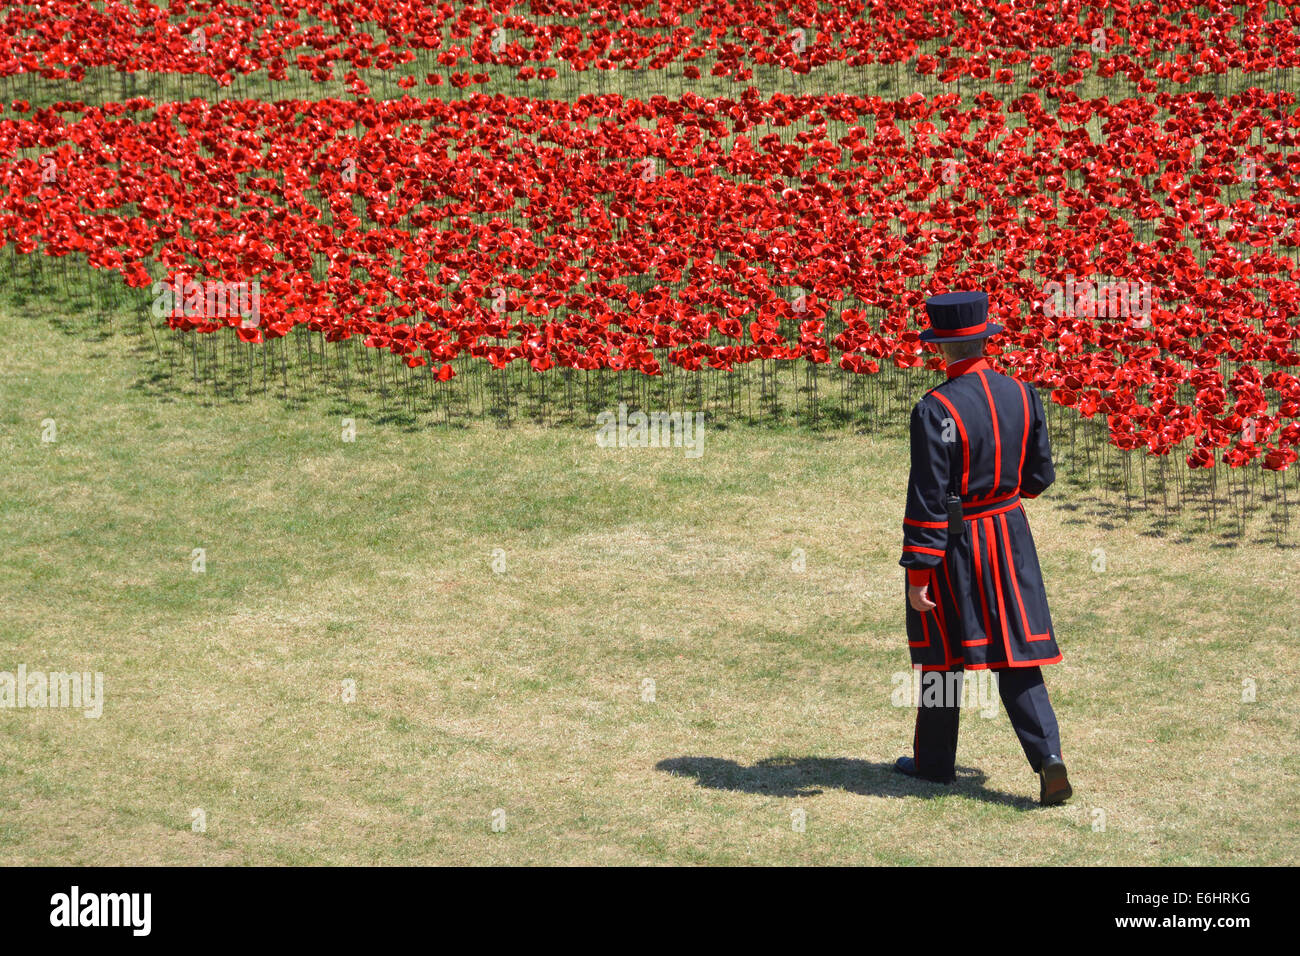 Yeoman Warder & field of Ceramic Poppies 'Blood swept lands & seas of red' World War 1 tribute in the dry moat at the Tower of London Tower Hamlets UK Stock Photo